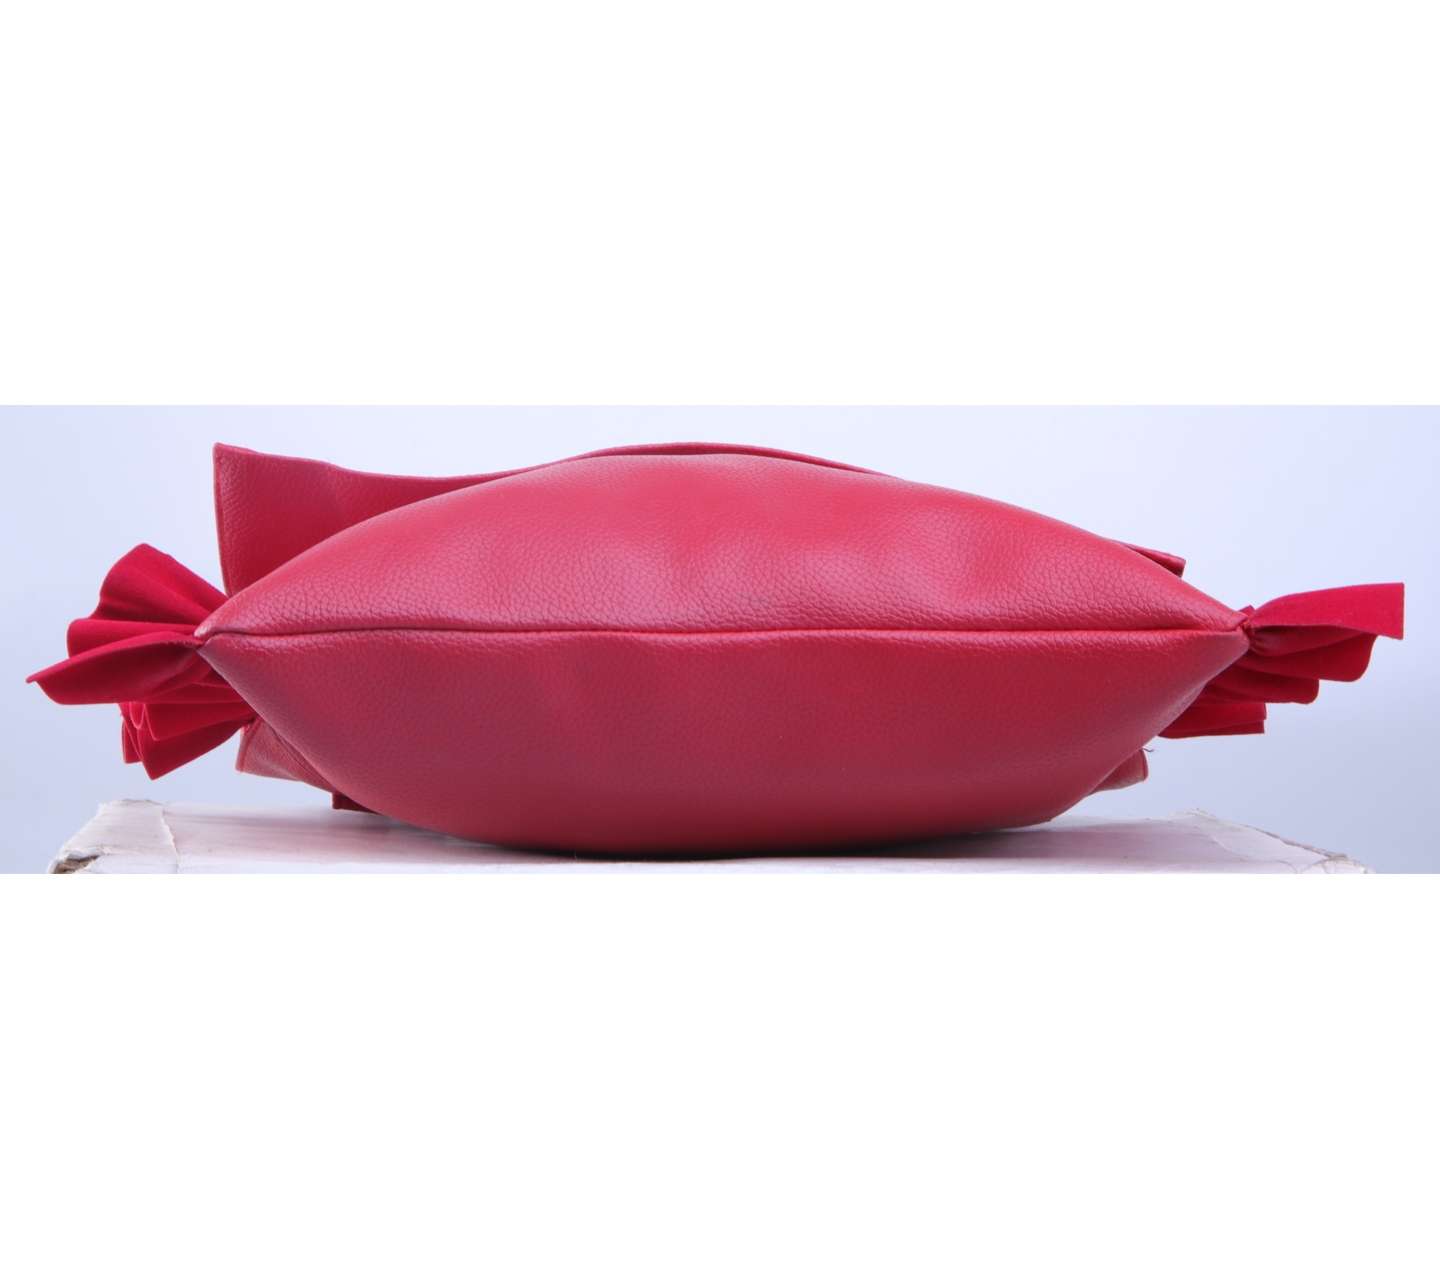 Mannequin Plastic Red Ruffle Flap Sling Bag